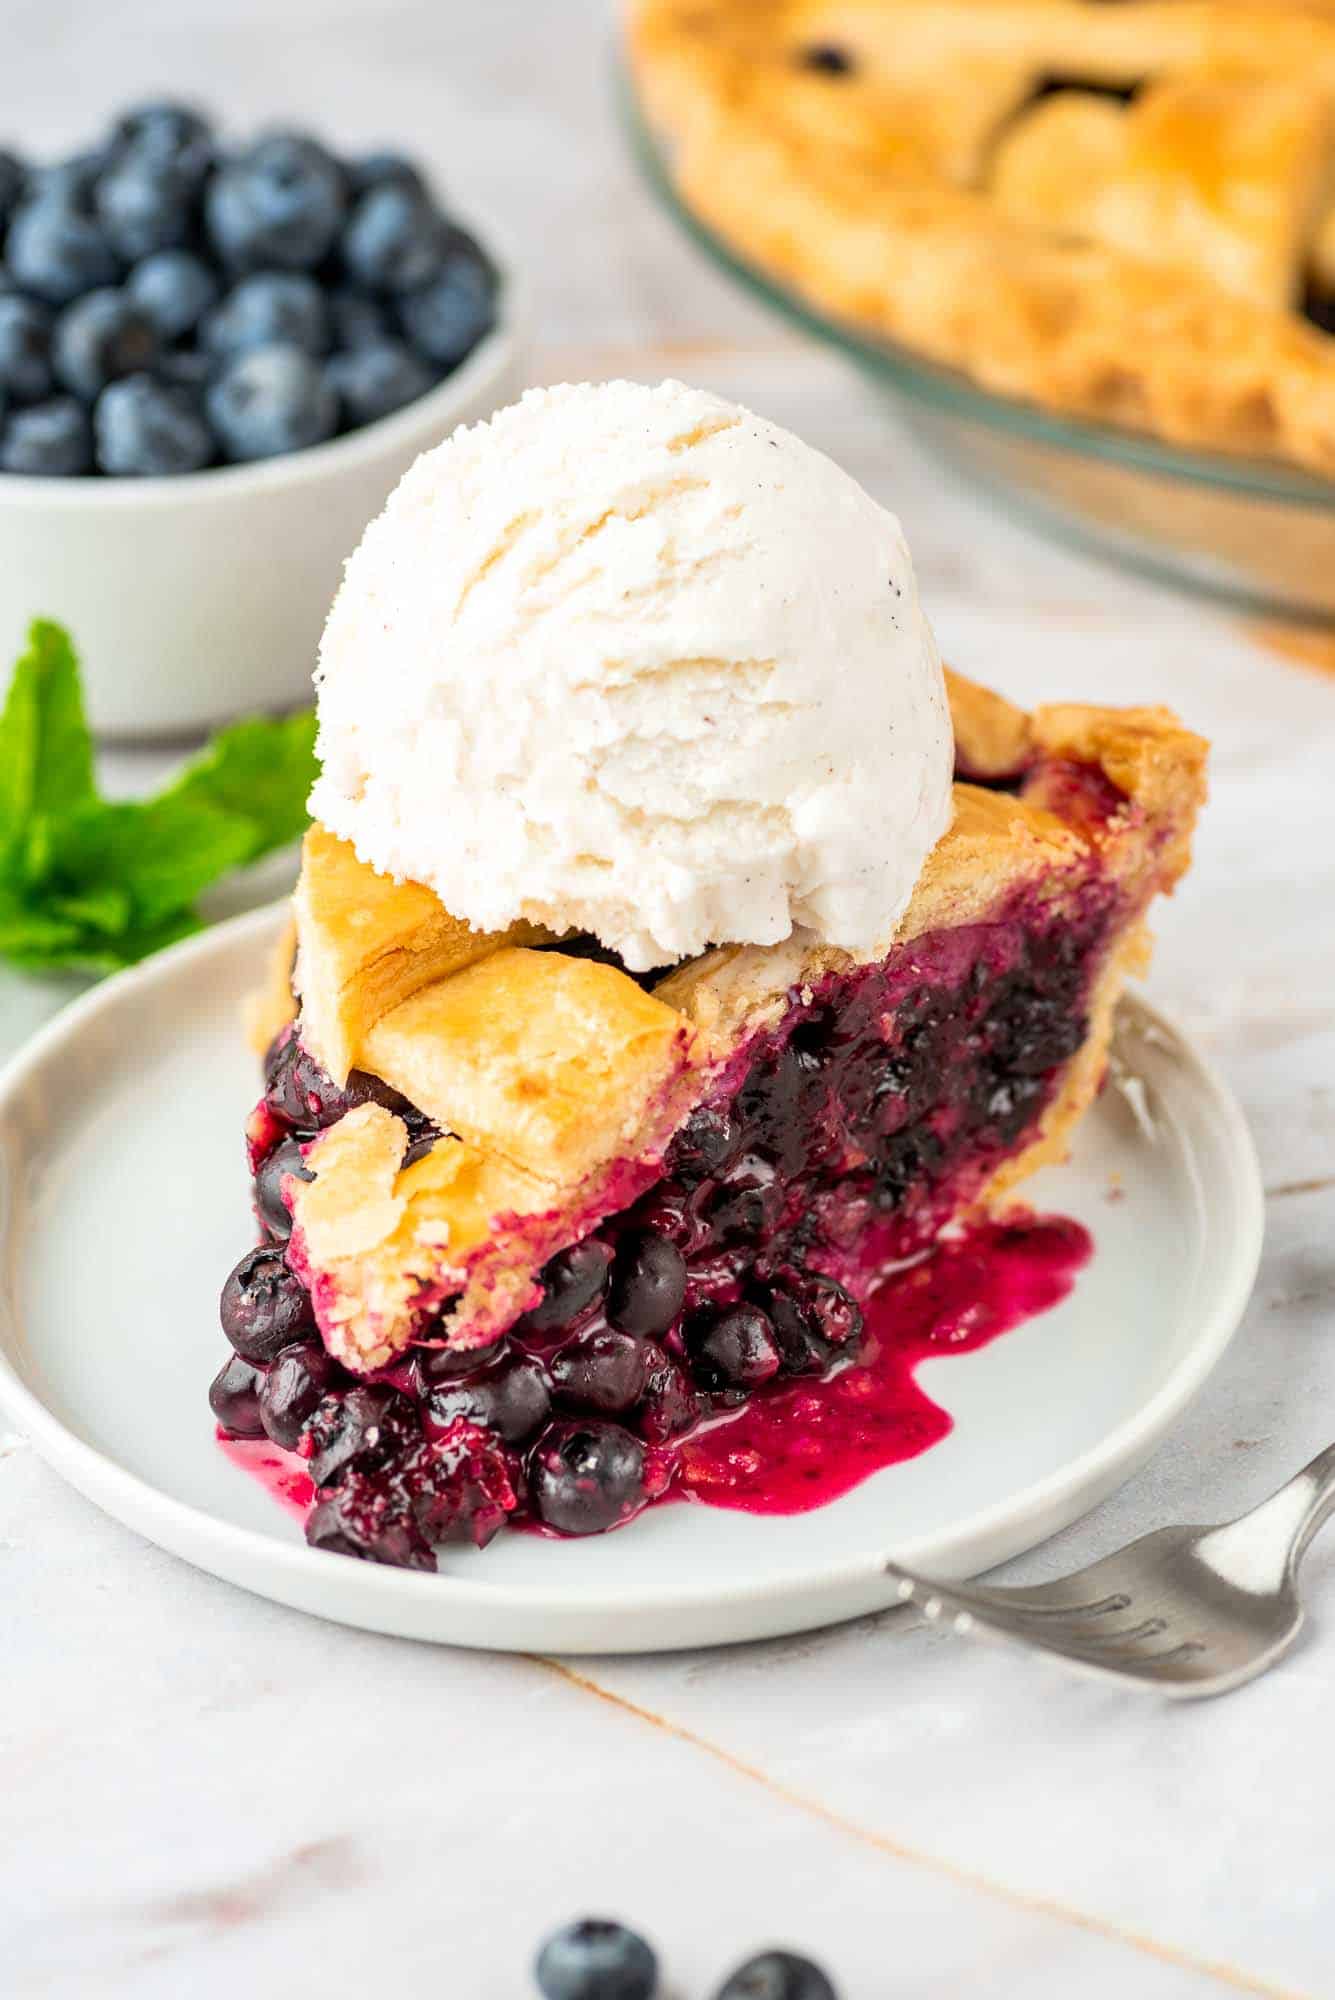 A slice of blueberry pie served on a small white plate with vanilla ice cream